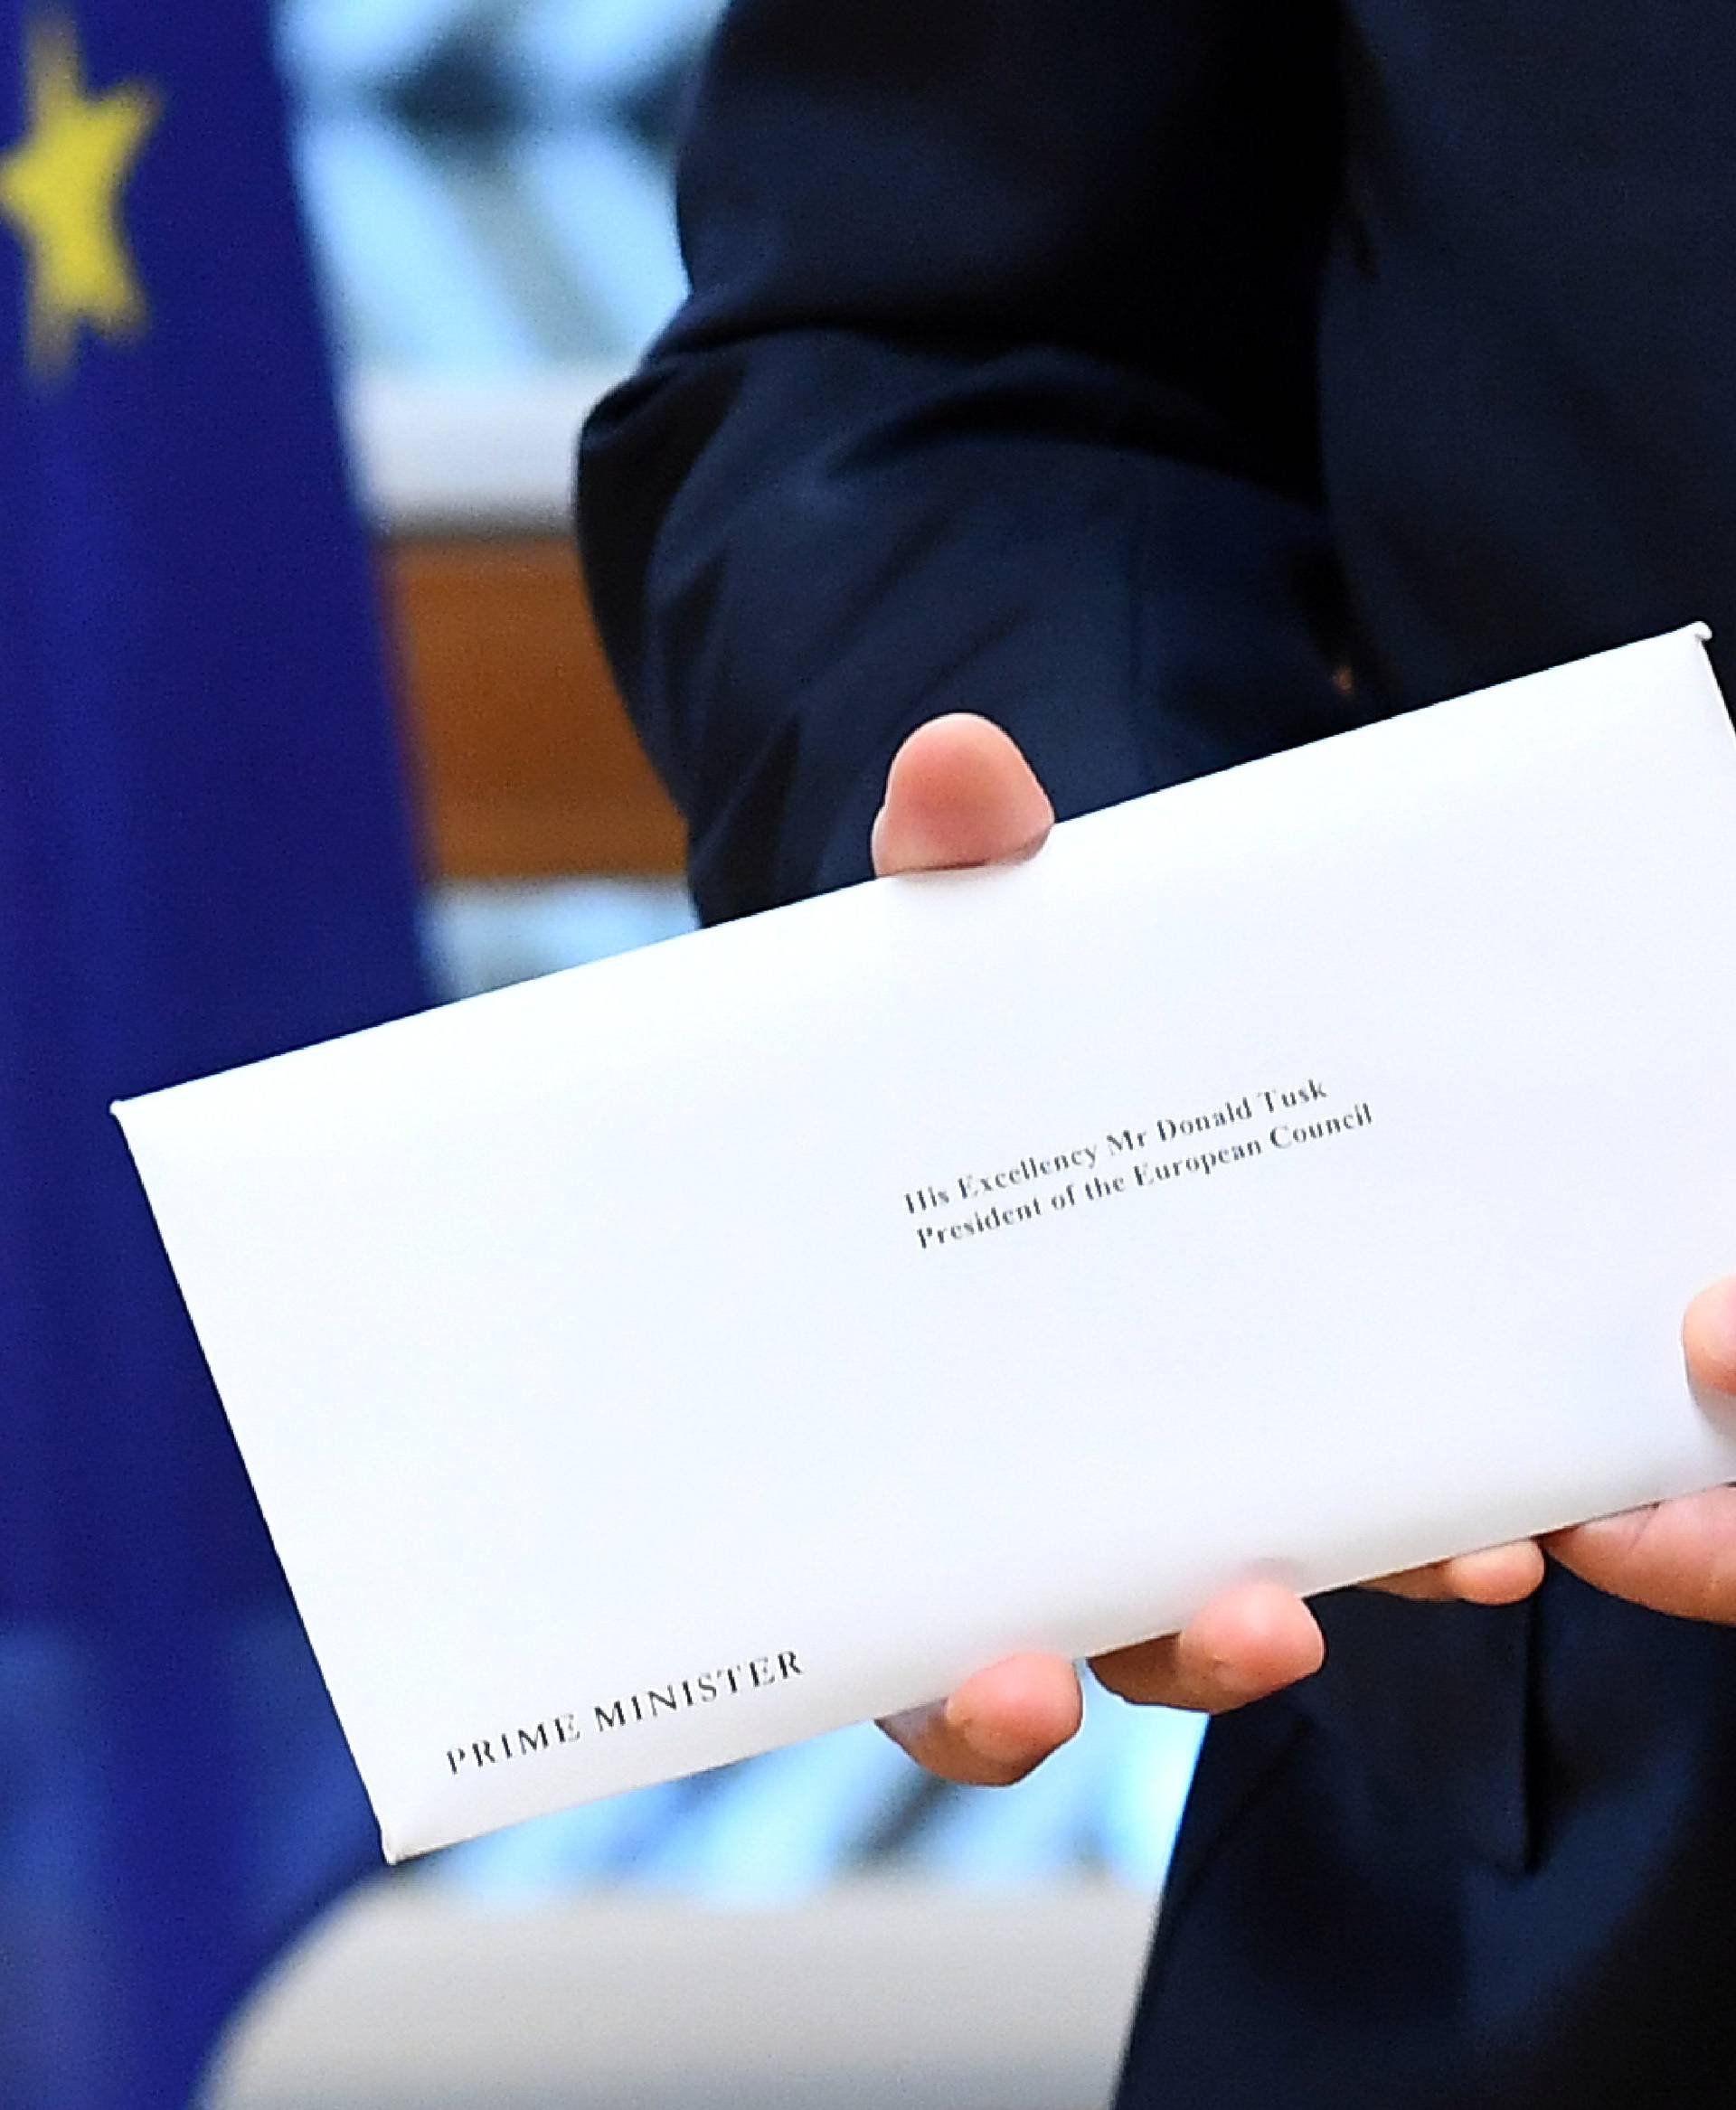 EU Council President Donald Tusk holds British Prime Minister Theresa May's Brexit letter which was delivered by Britain's permanent representative to the European Union, Barrow, that gives notice of the UK's intention to leave the bloc under Article 50